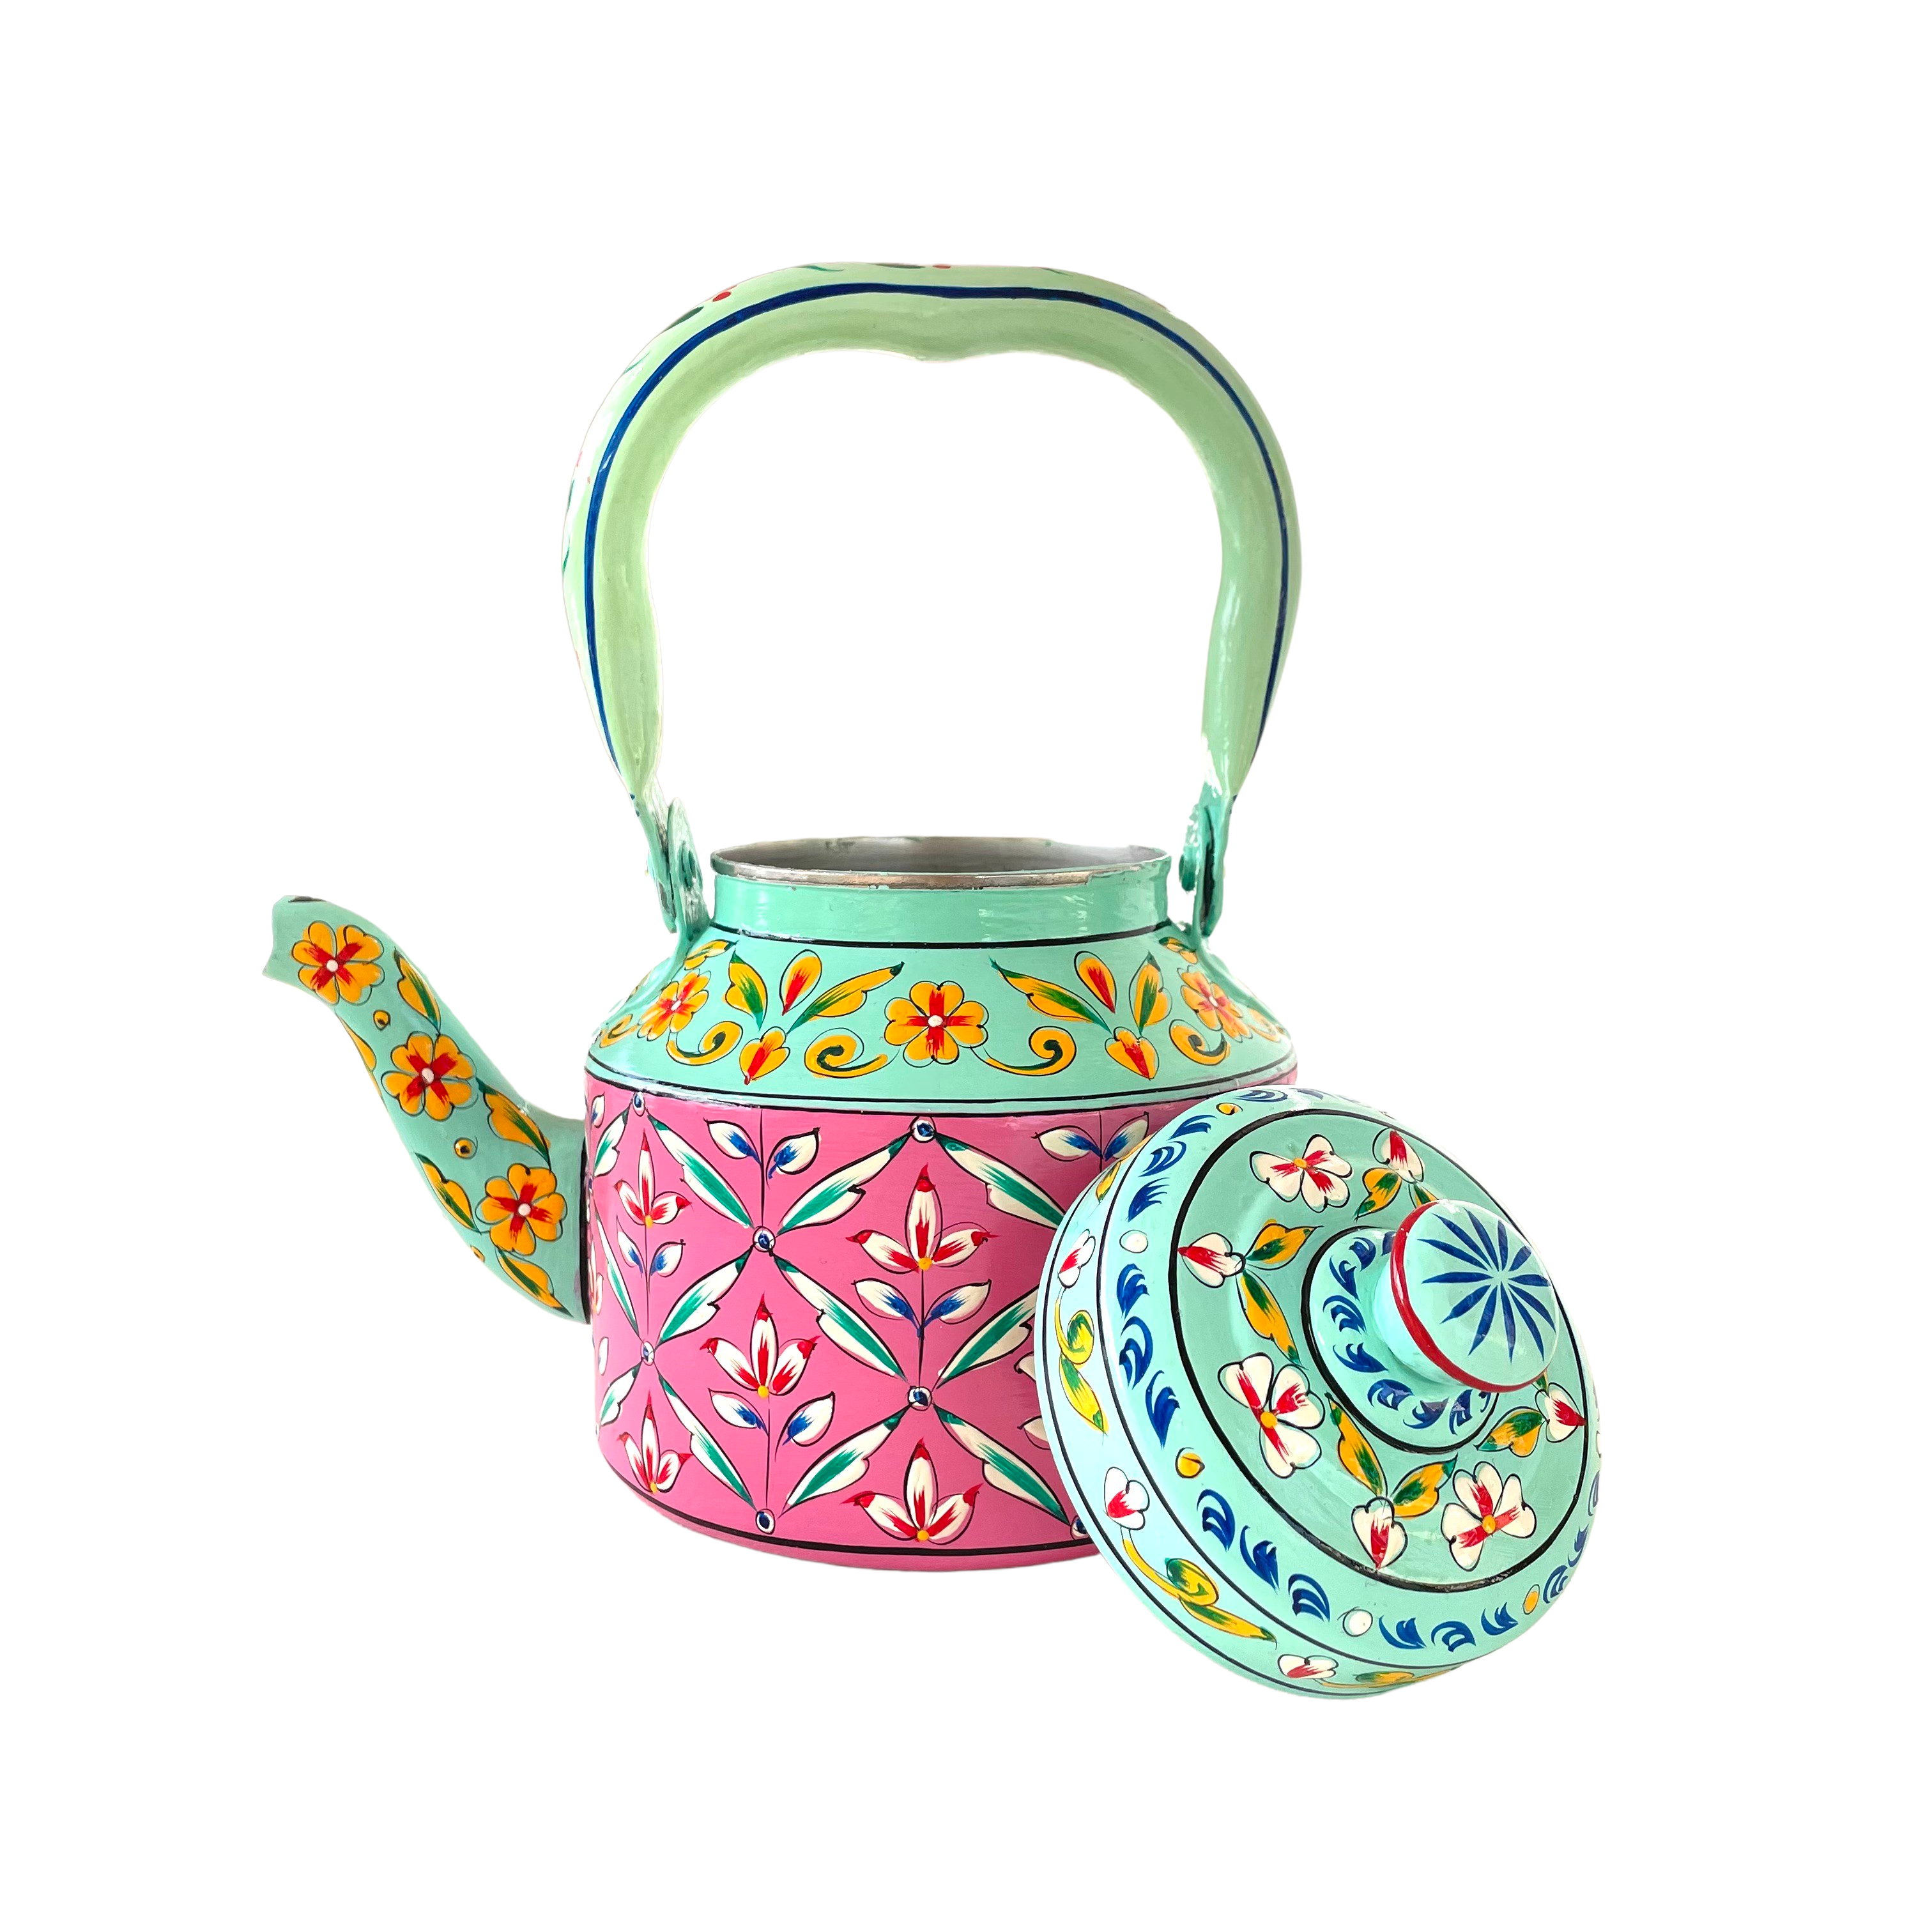 Ragamala - Hand Painted Chai Kettle Teapot in Green, Gold, & Red